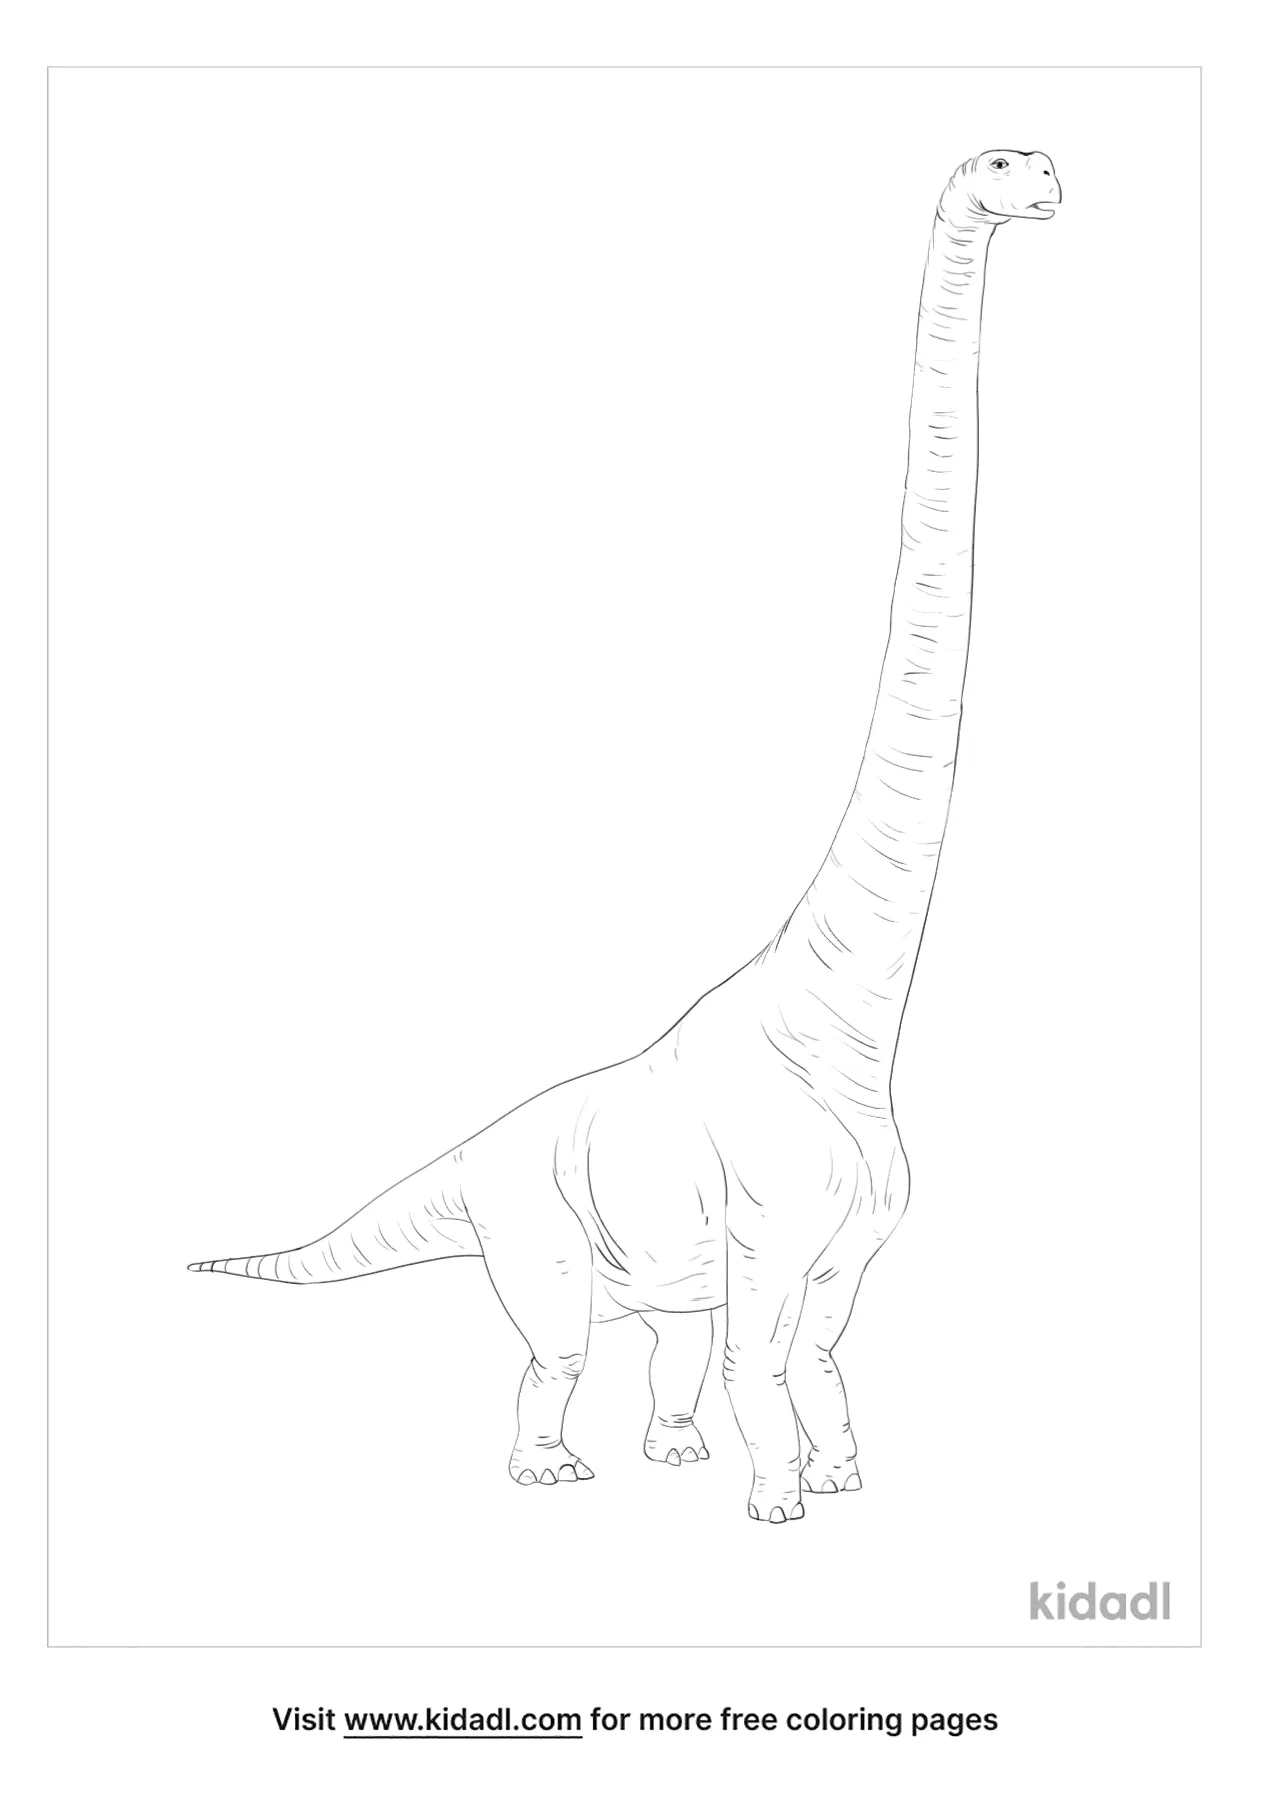 Dreadnoughtus Coloring Page